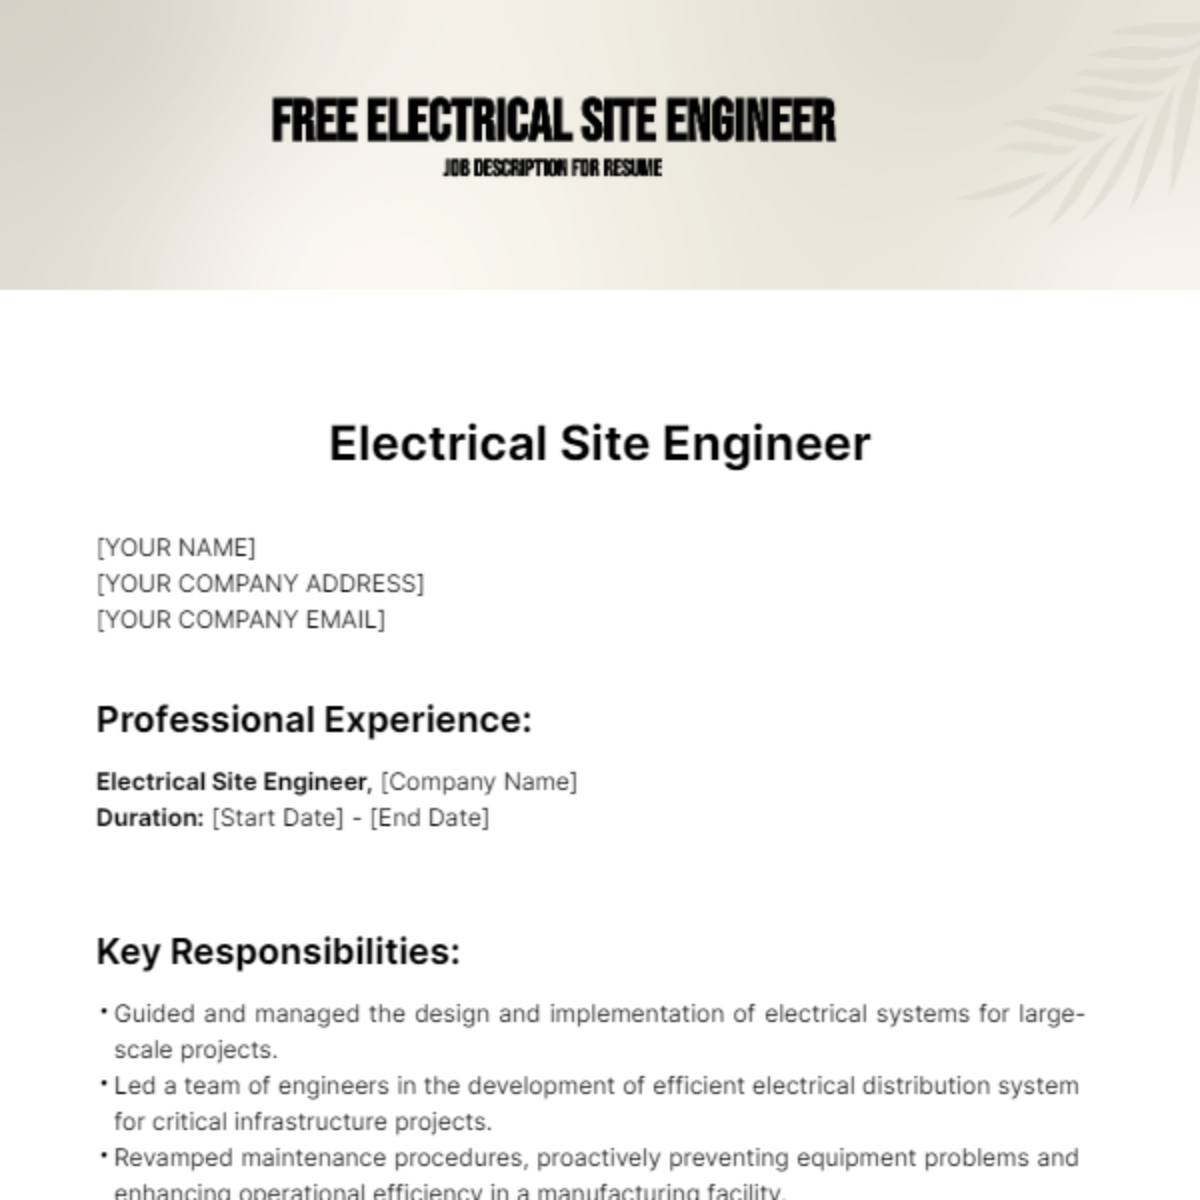 Free Electrical Site Engineer Job Description for Resume Template